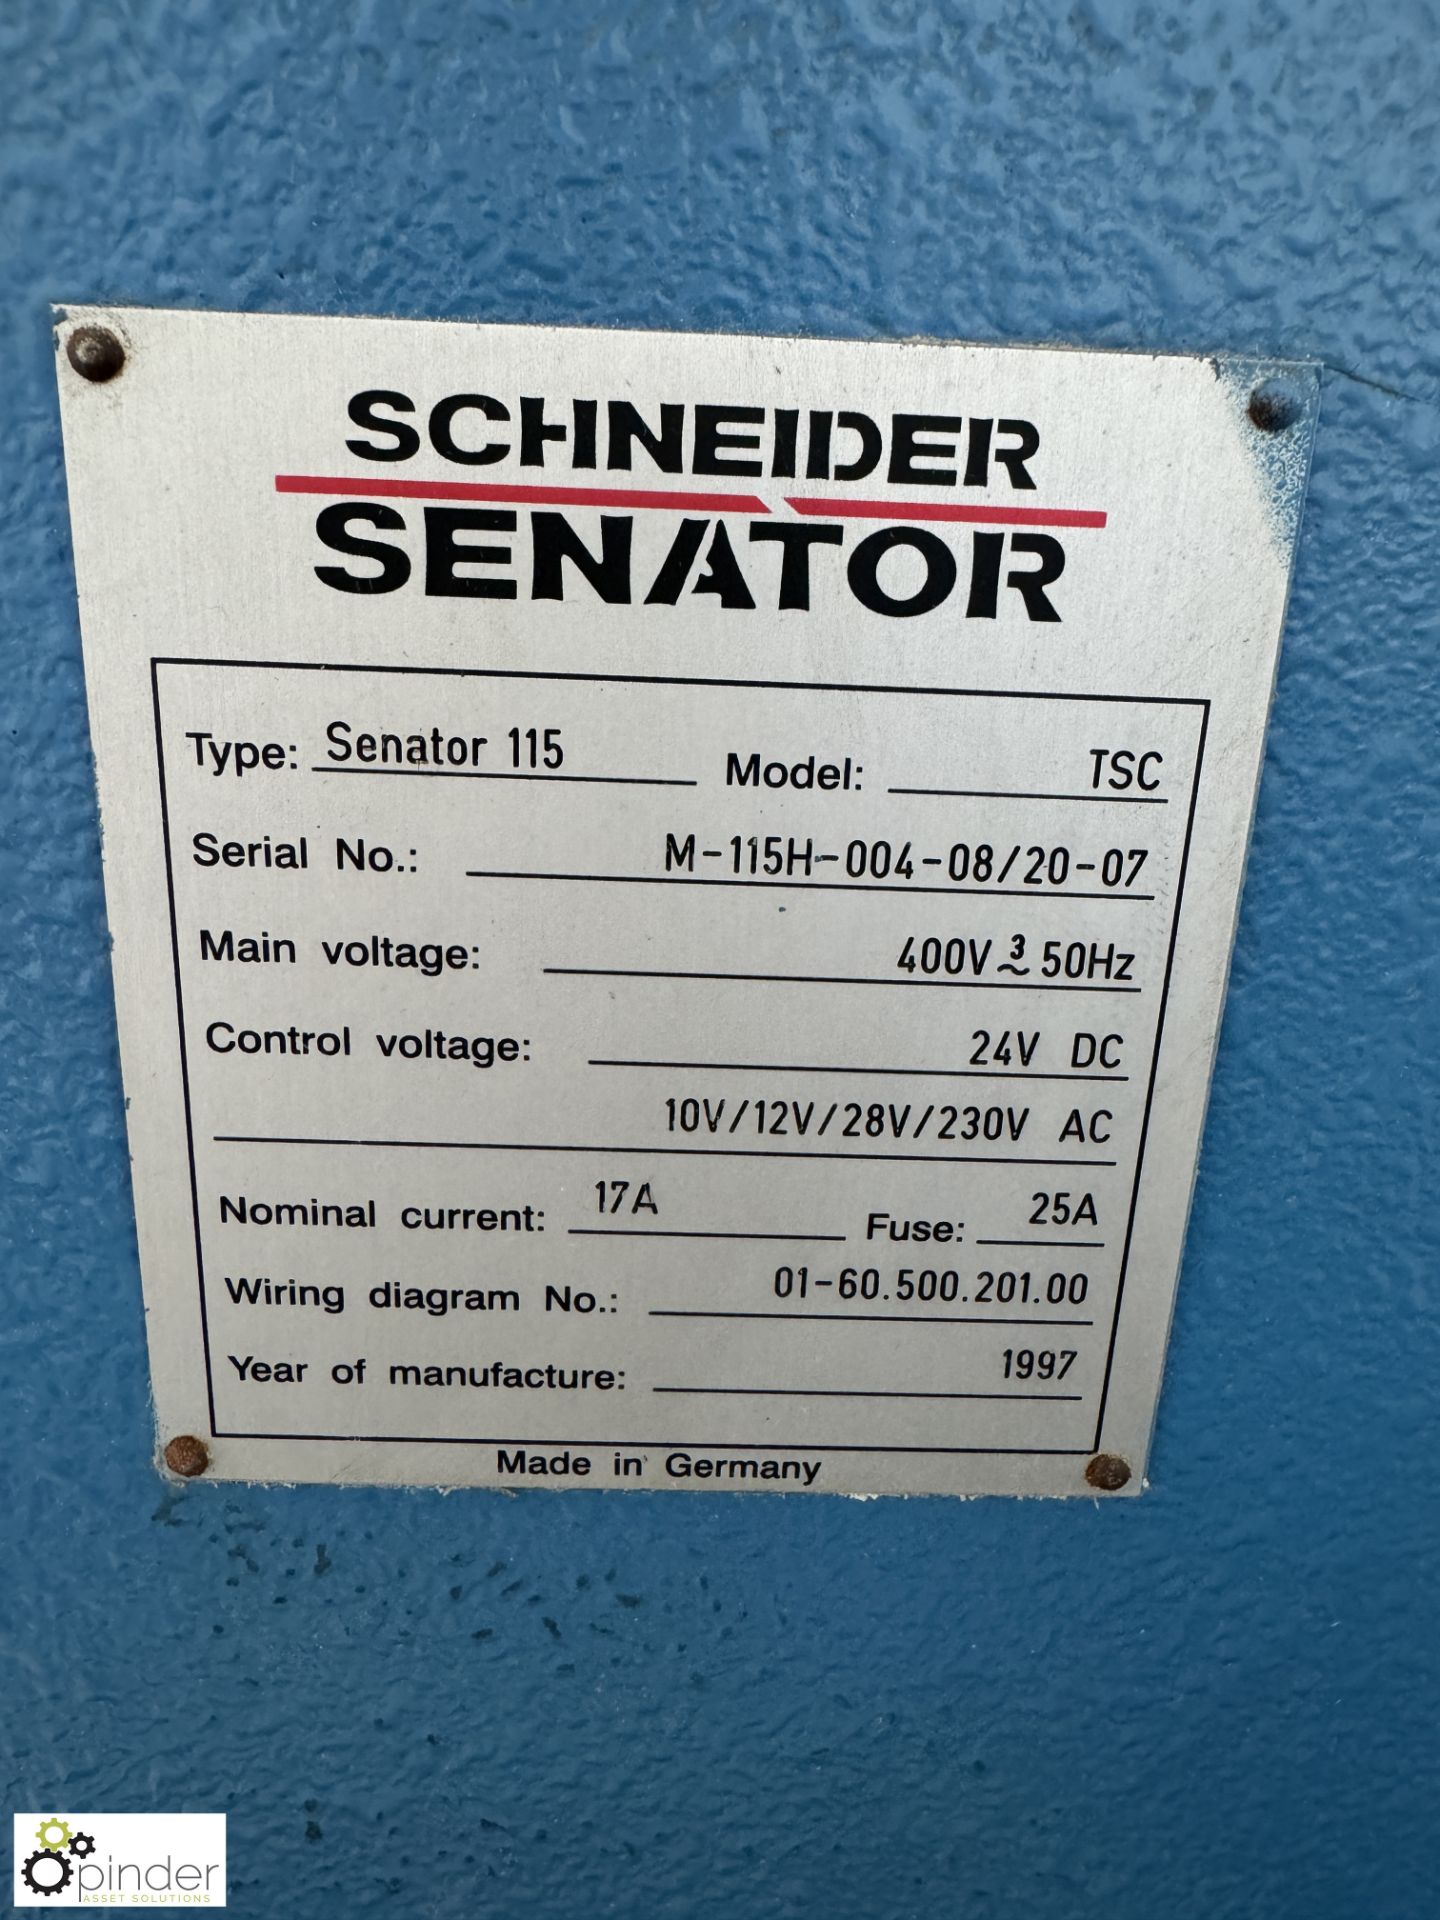 Schneider Senator S-Line 115 TSC Guillotine, 115cm, 400volts, year 1997, serial number M-115H-004- - Image 8 of 14